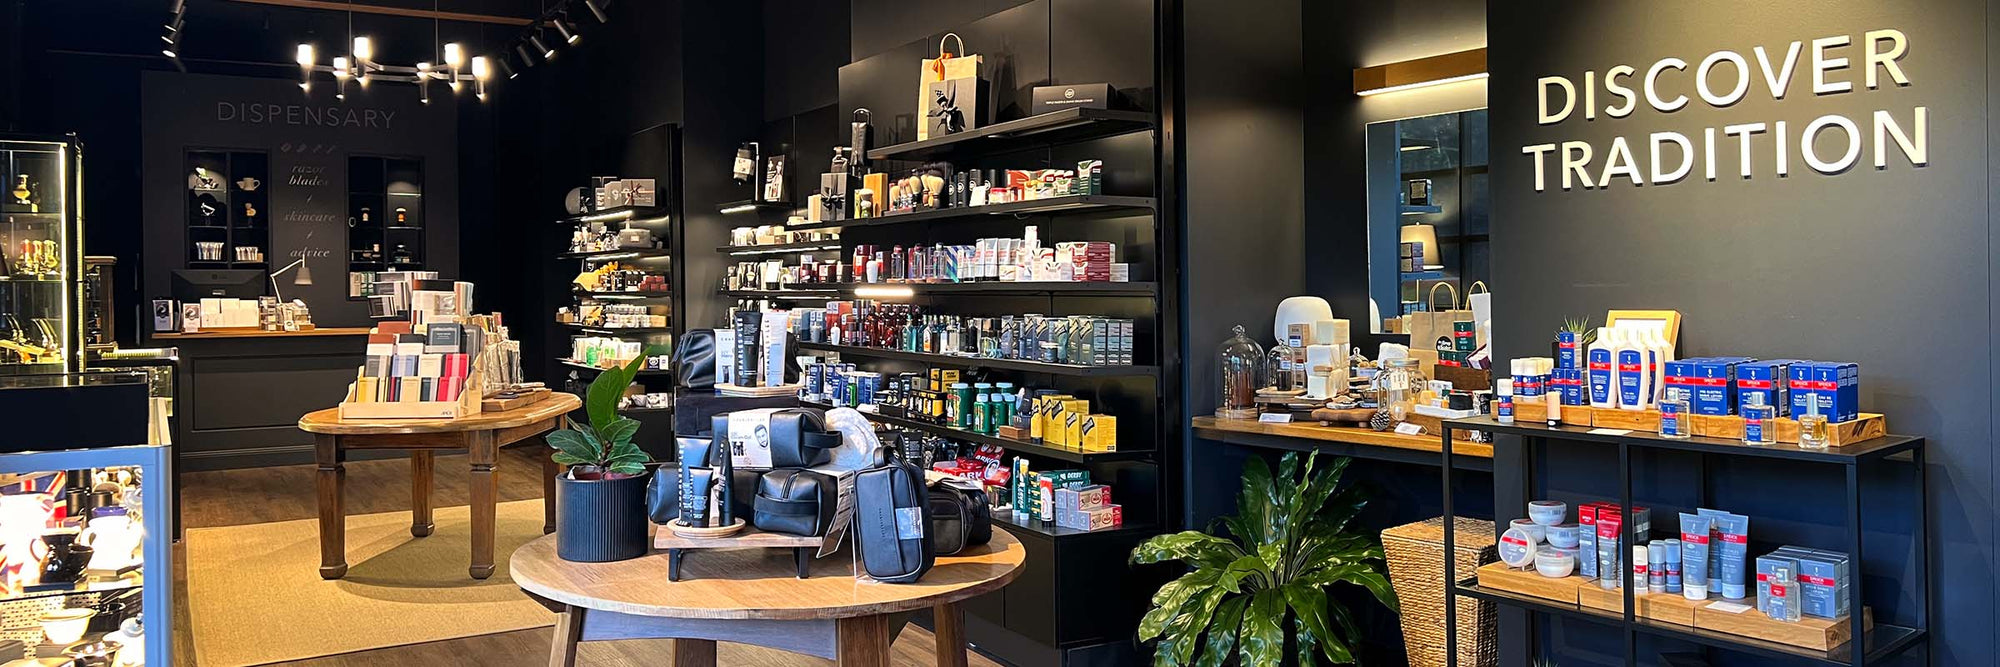 Interior of The Stray Whisker shop which is in Leura, Blue Mountains NSW. It's a dark interior with oak display tables in the centre and comprises shaving, beard and journaling products